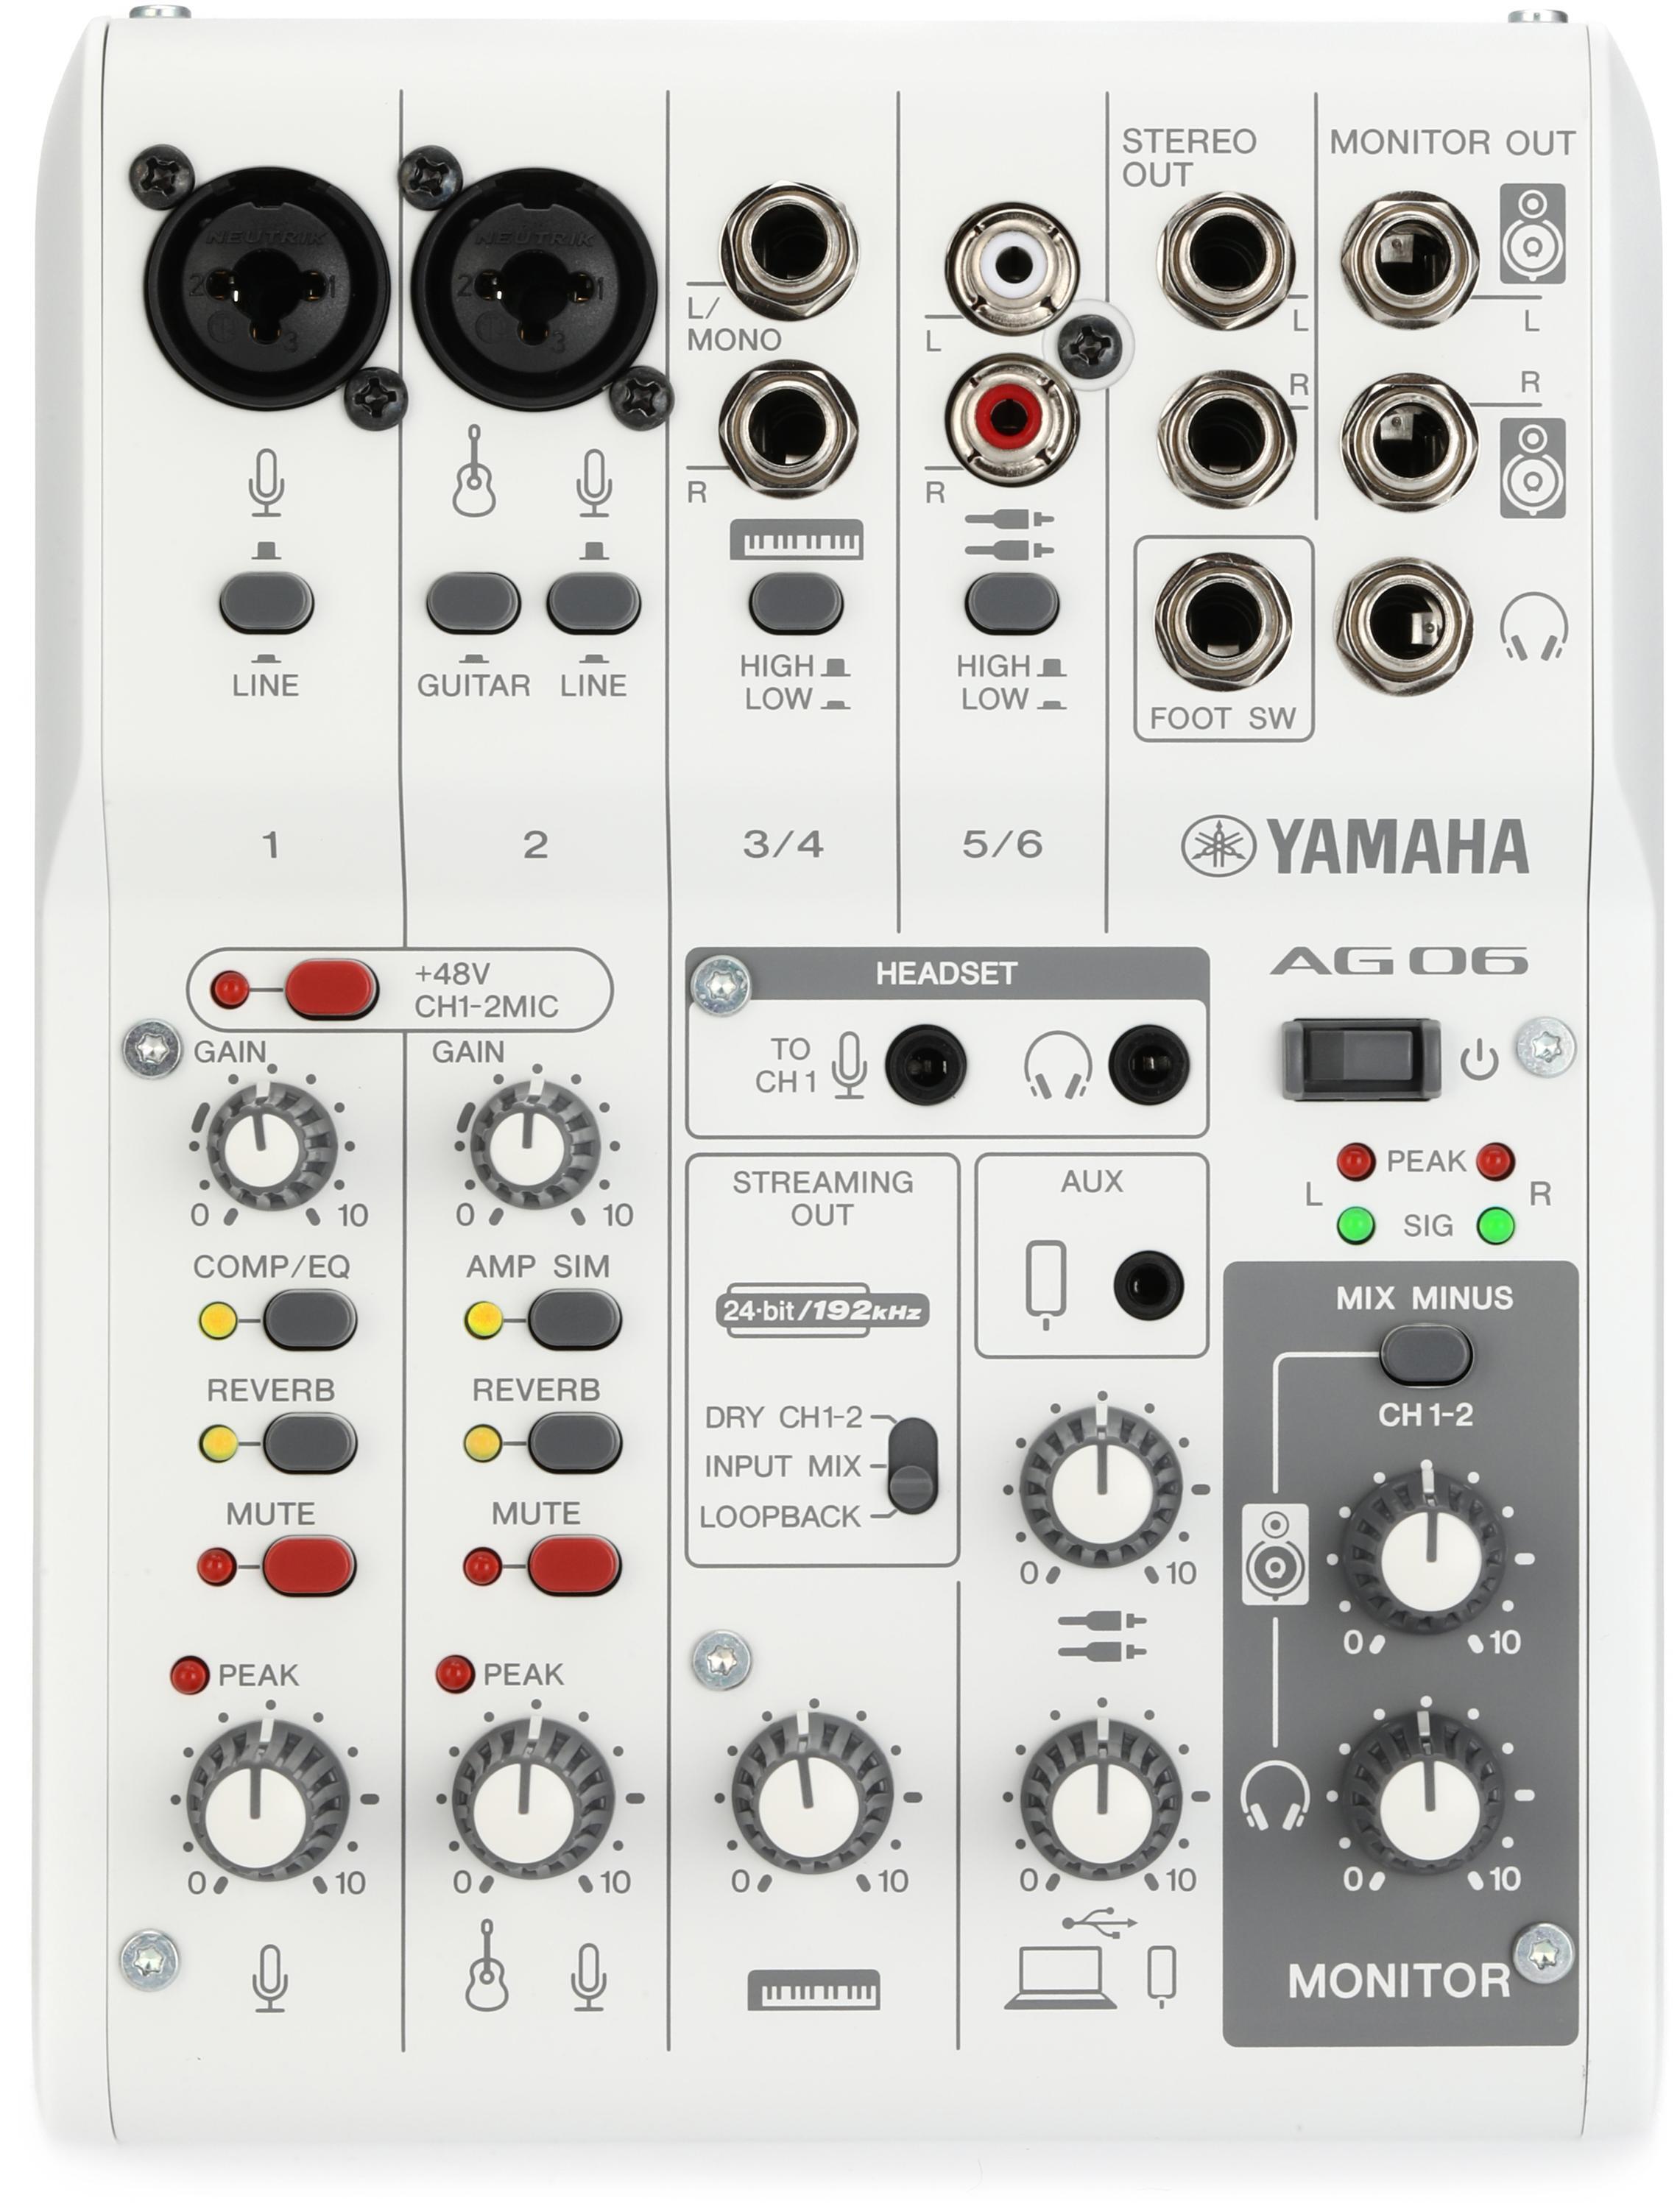 Yamaha AG03 Mk2 3-channel Mixer and USB Audio Interface - White 